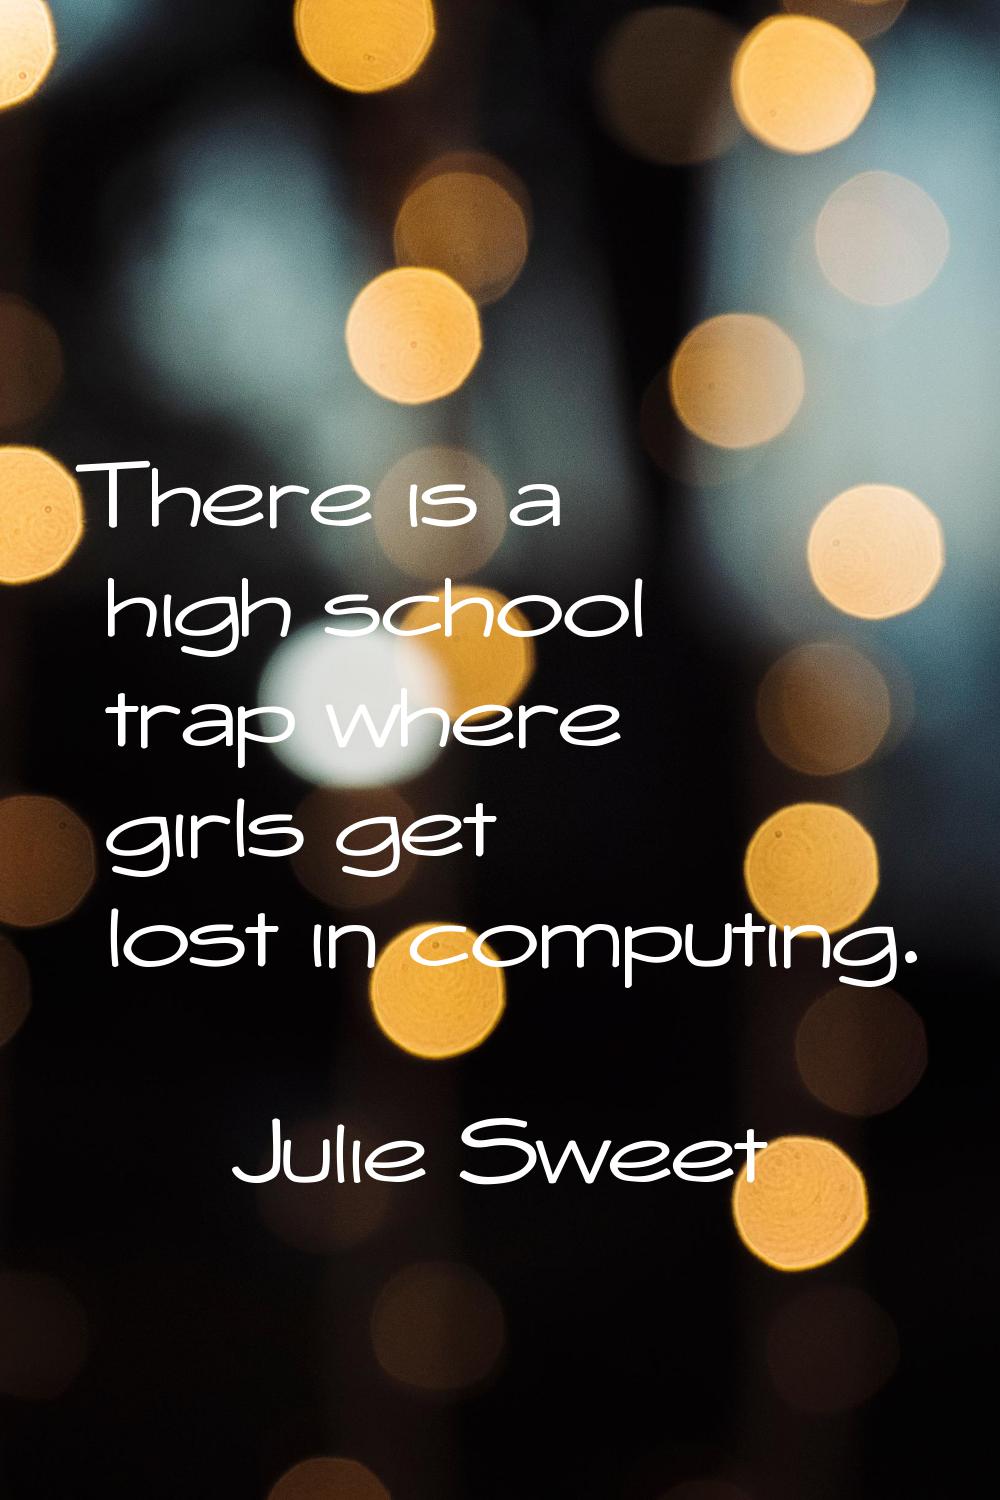 There is a high school trap where girls get lost in computing.